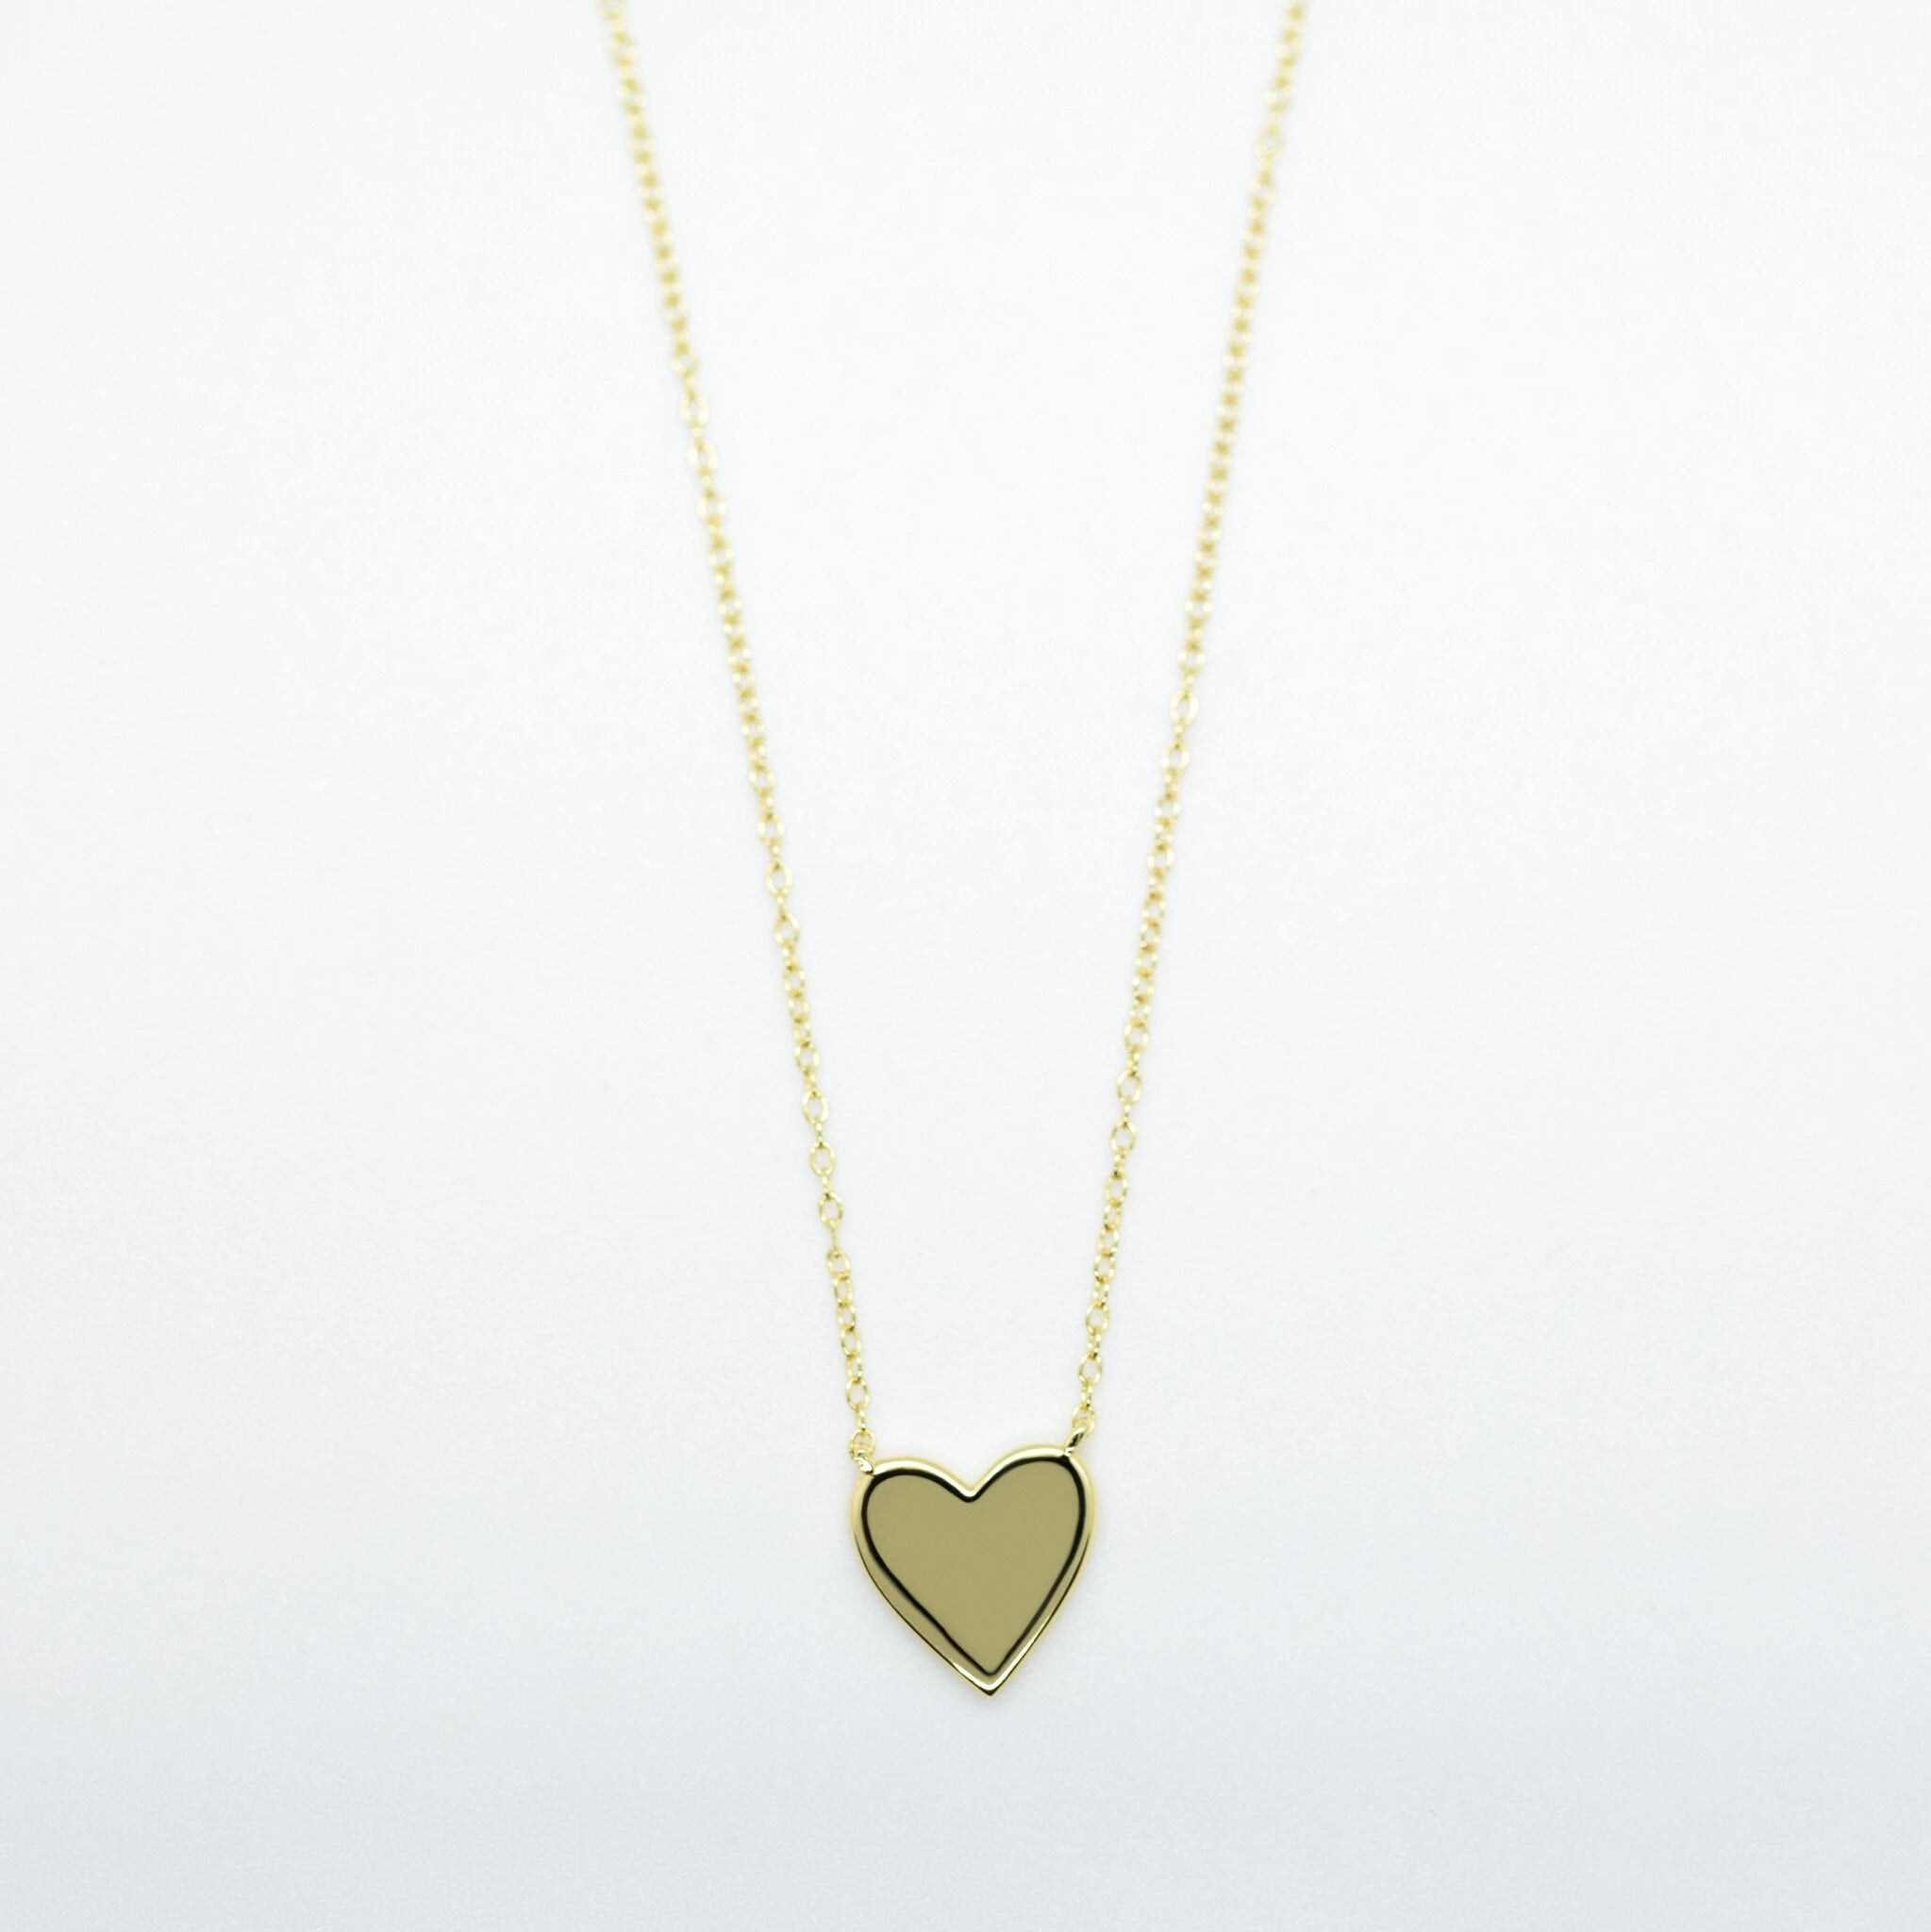 Paisley Solid Heart Charm Necklace N339